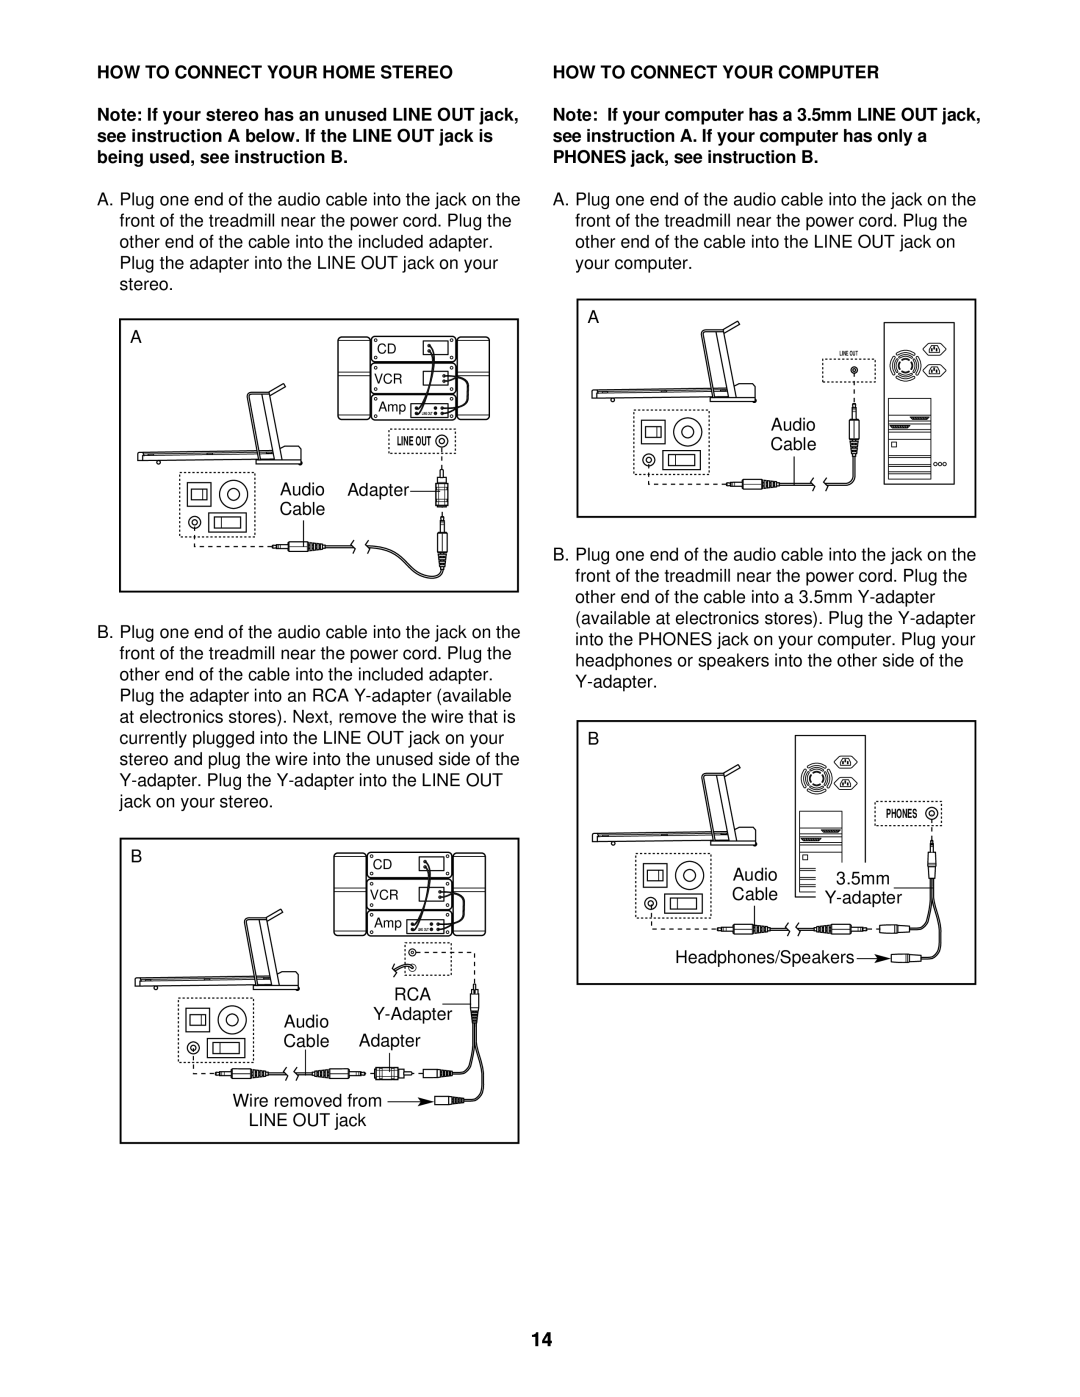 ProForm DRTL99720 How To Connect Your Home Stereo, How To Connect Your Computer, Wire removed from, LINE OUT jack 